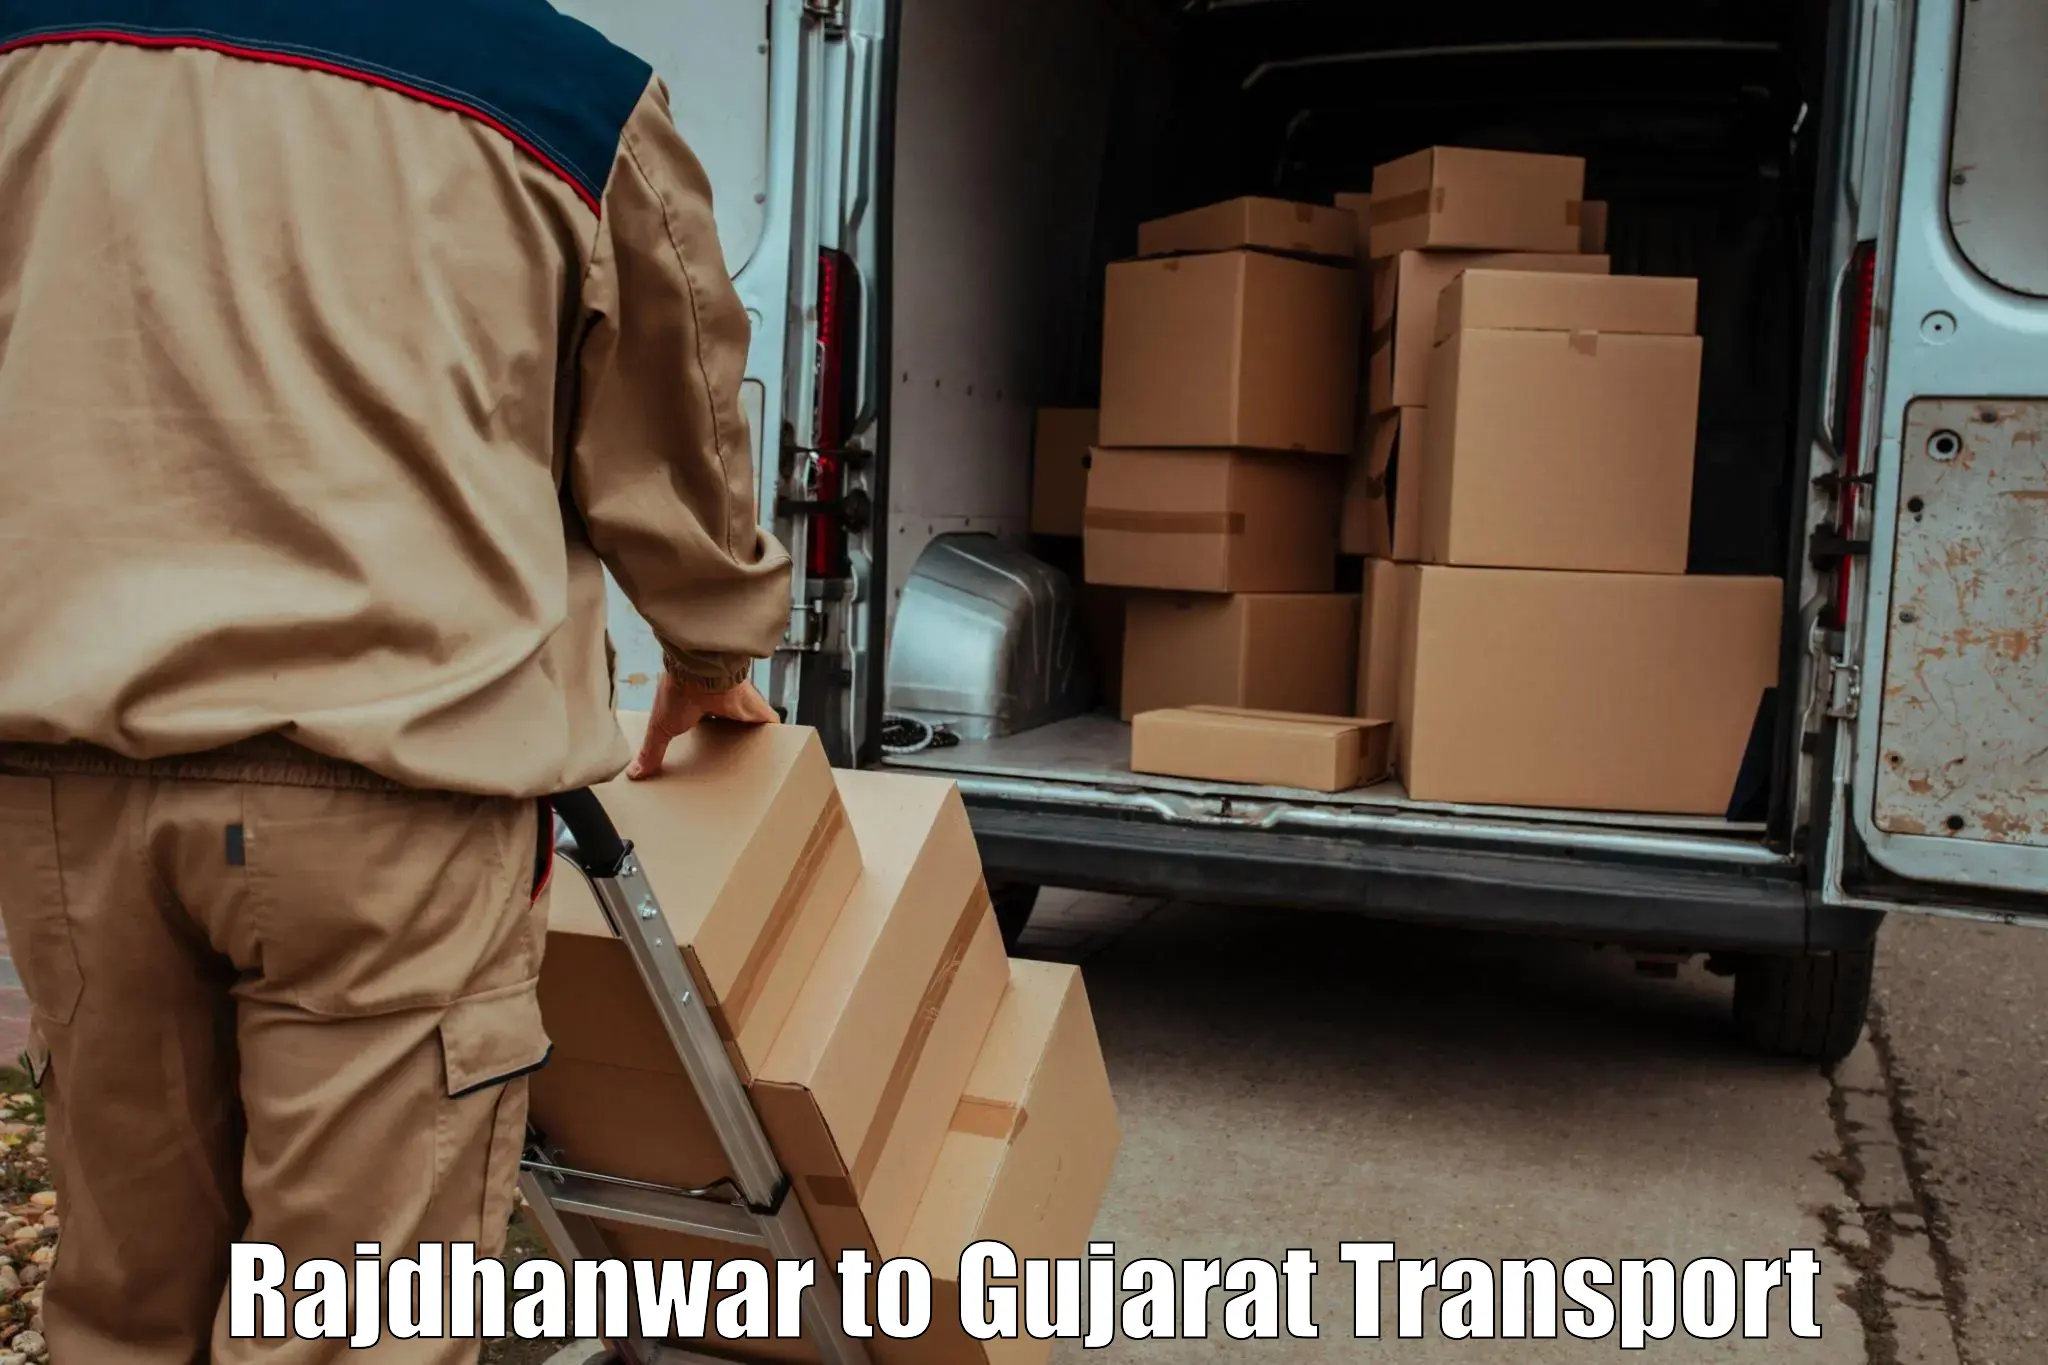 Commercial transport service Rajdhanwar to Palanpur